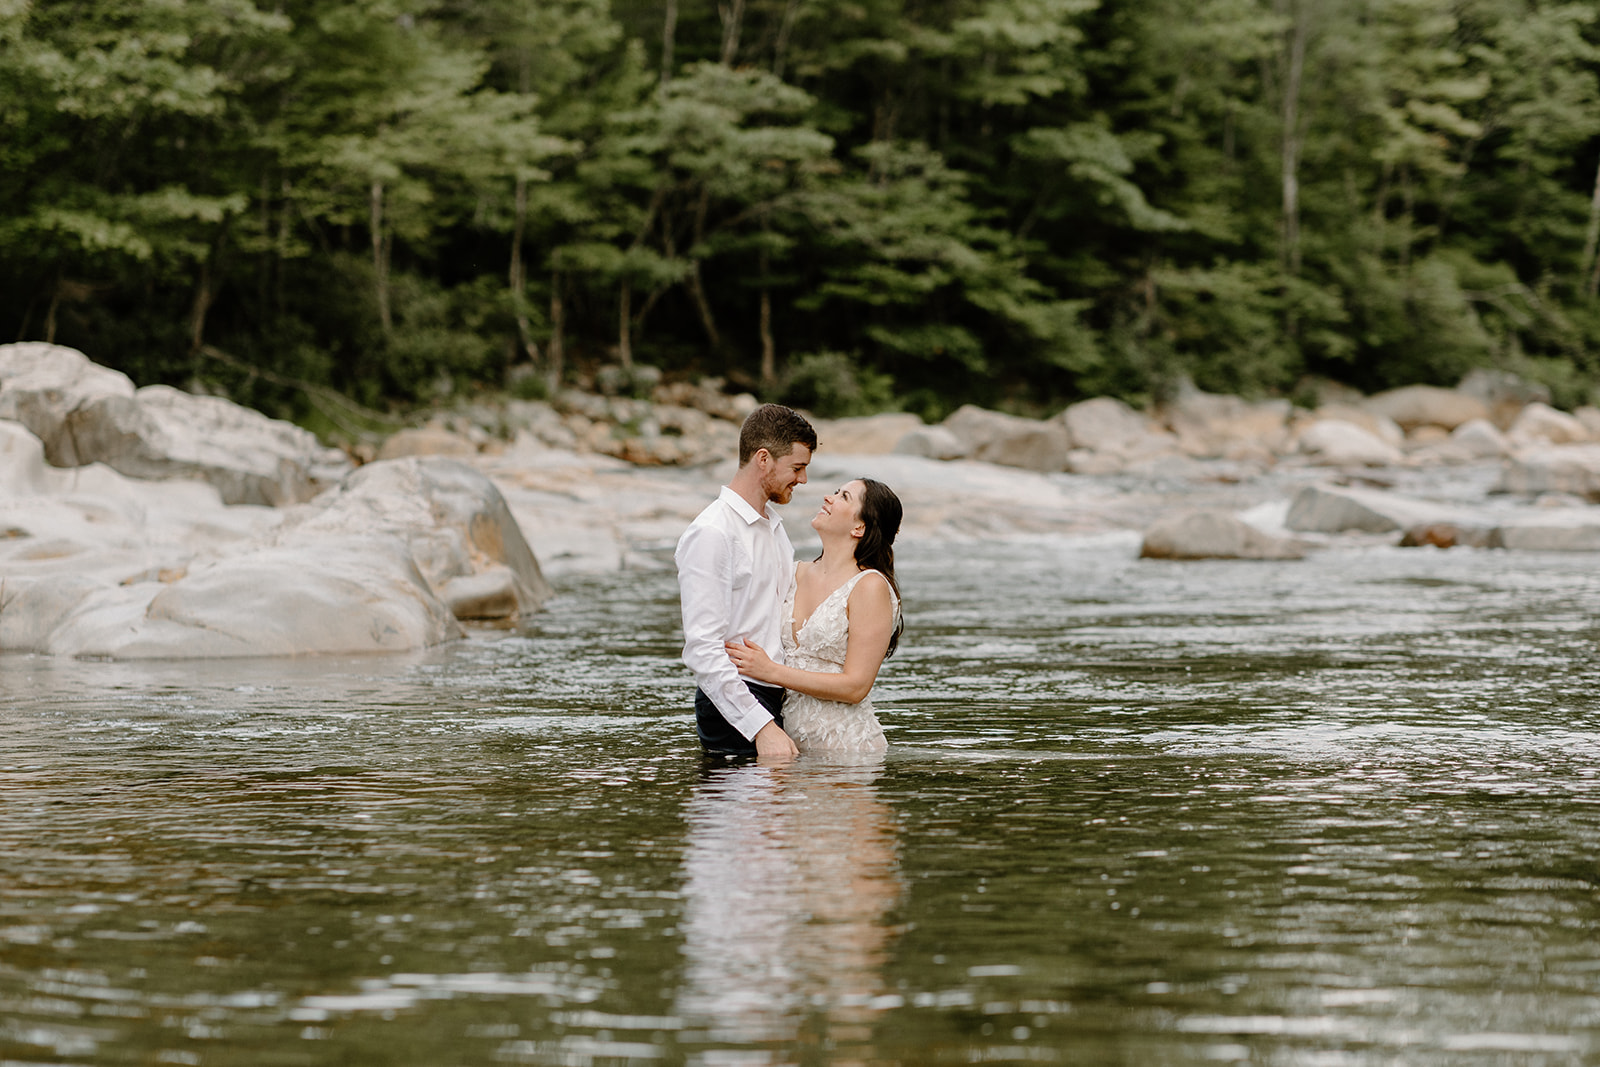 Bride and groom in river taking wedding photos